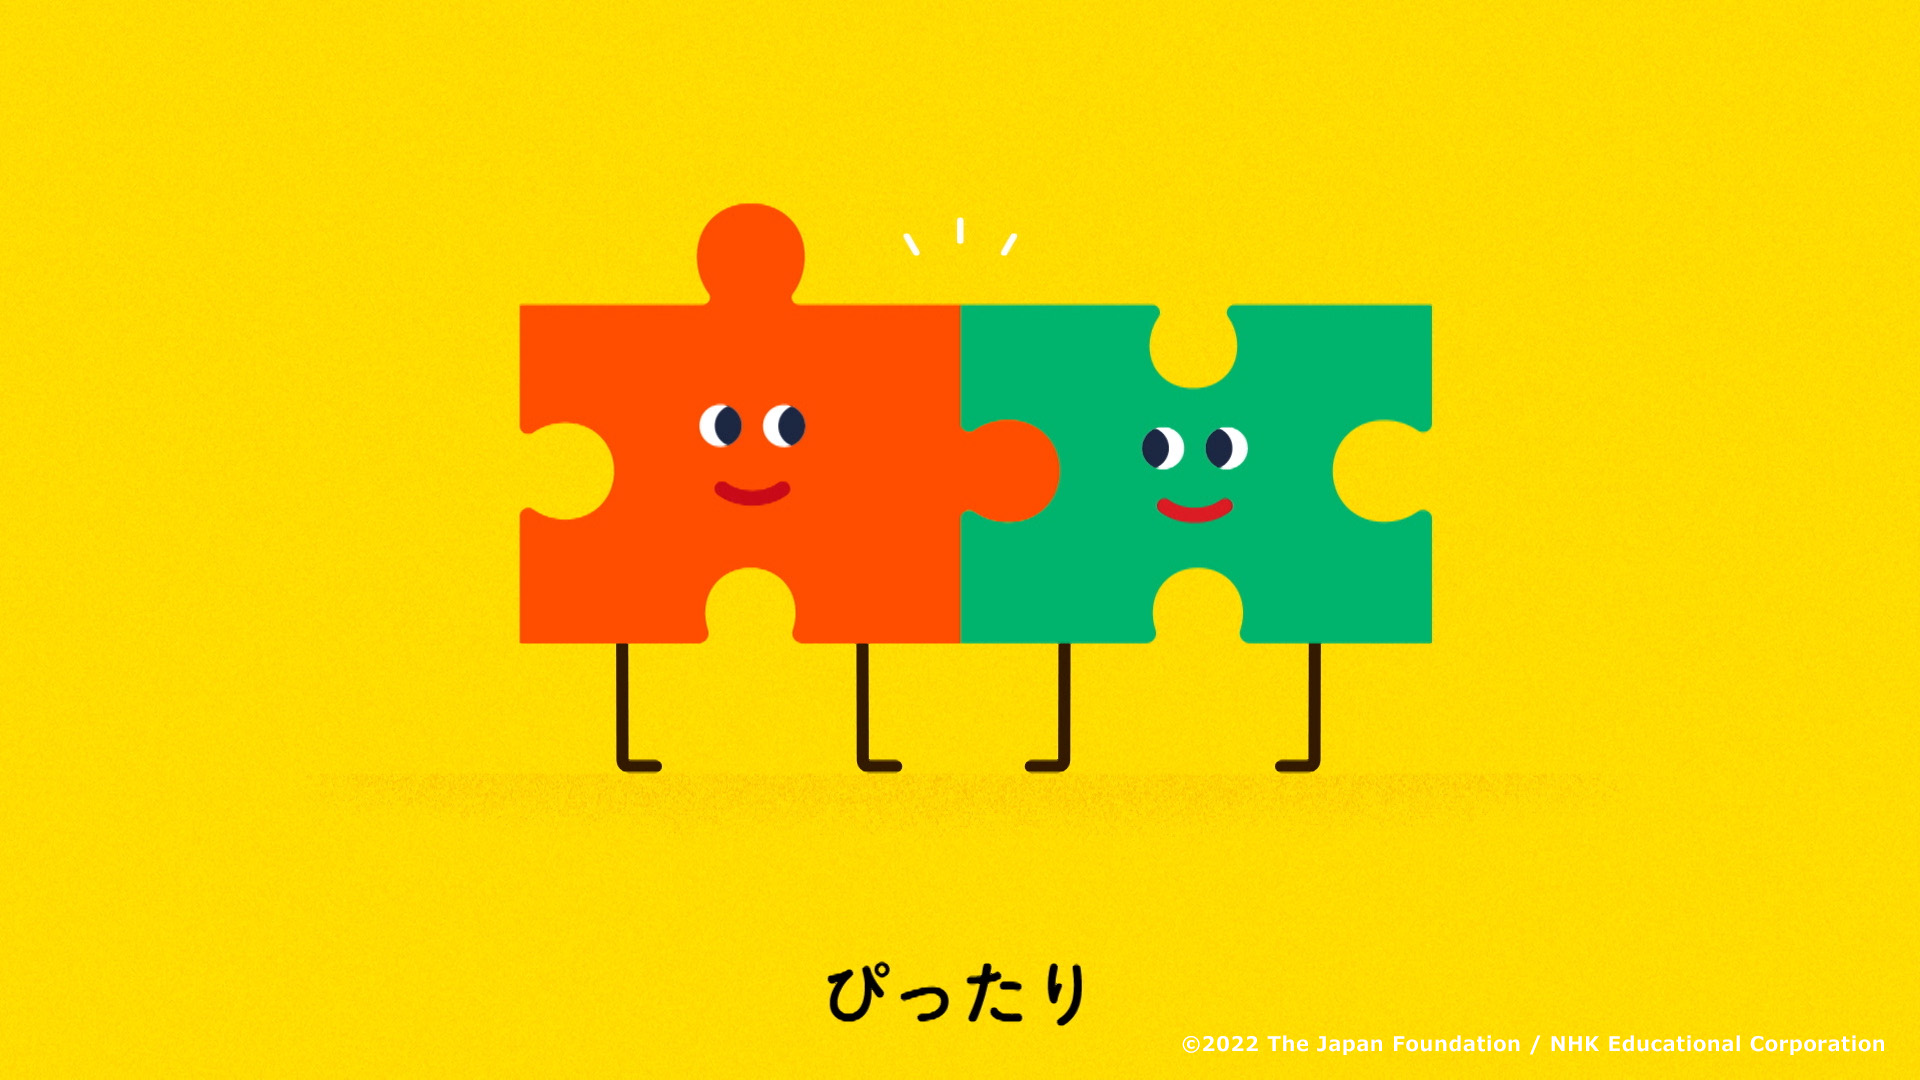 To create the image of ぴったり, an illustrated image shows two pieces of puzzles fitting perfectly together